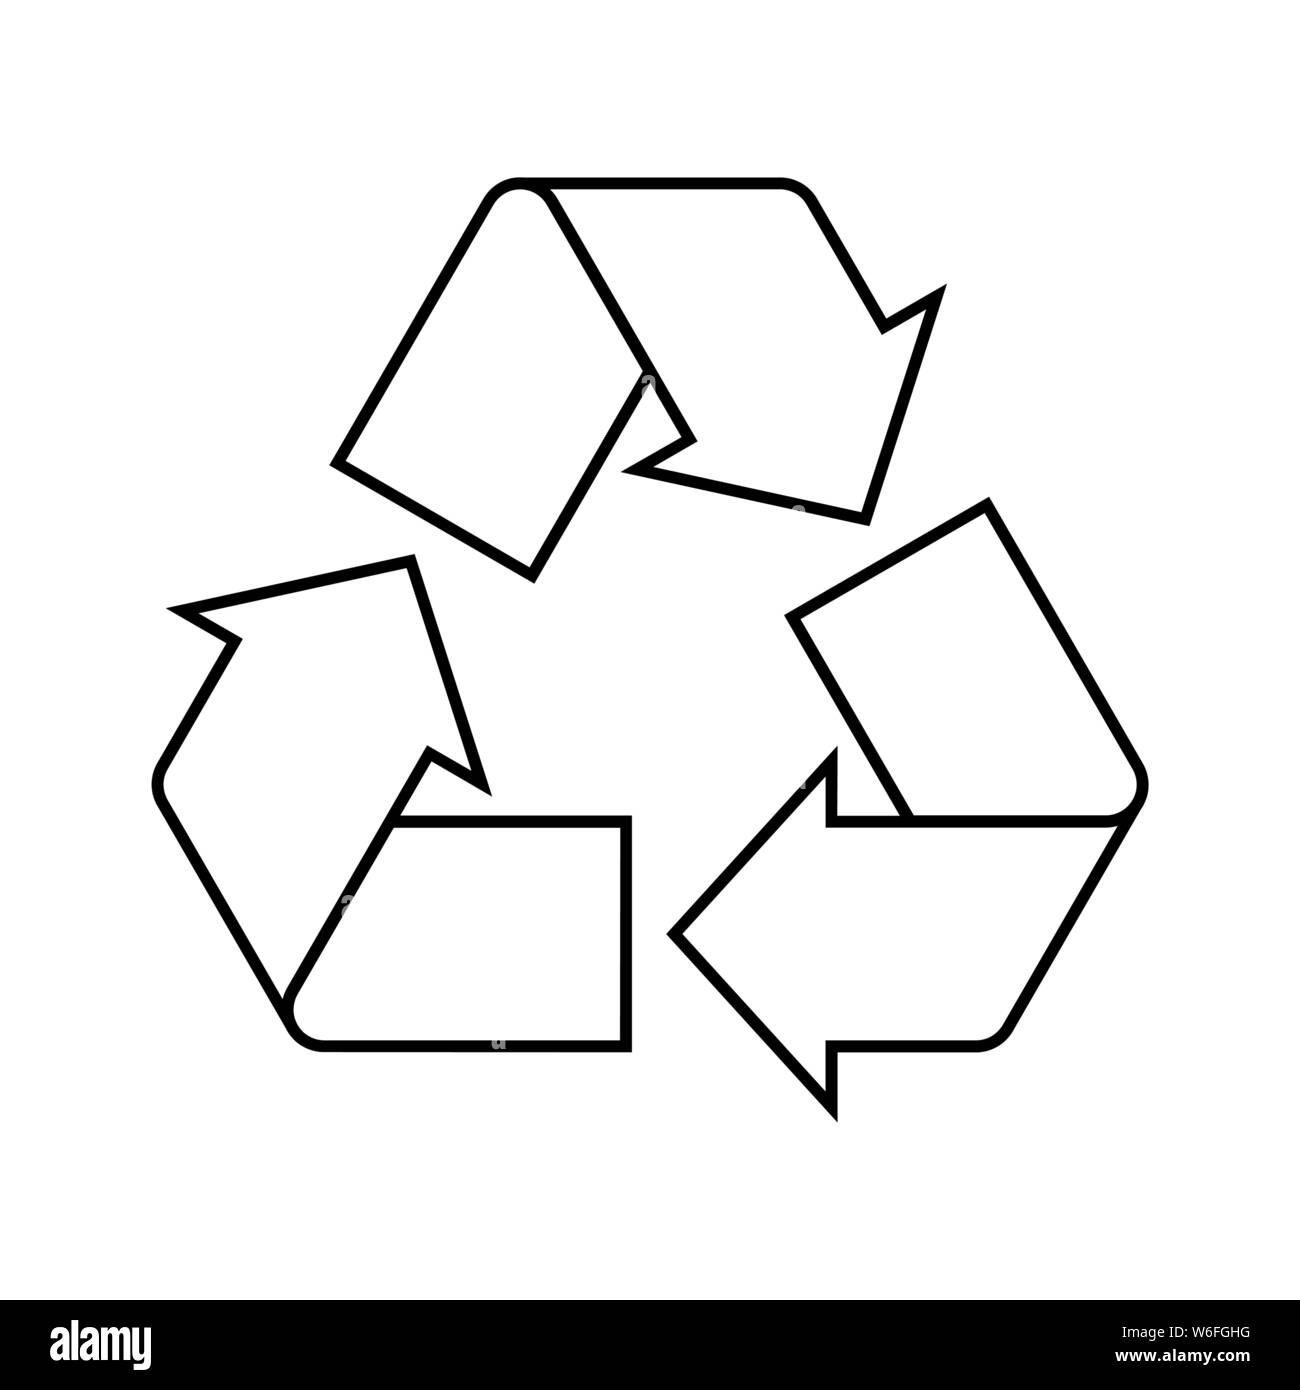 Simple black recycle sign outline. Linear recycle symbol, icon or logo on white background. Label for recyclable products. Reduce reuse recycle.Vector Stock Vector